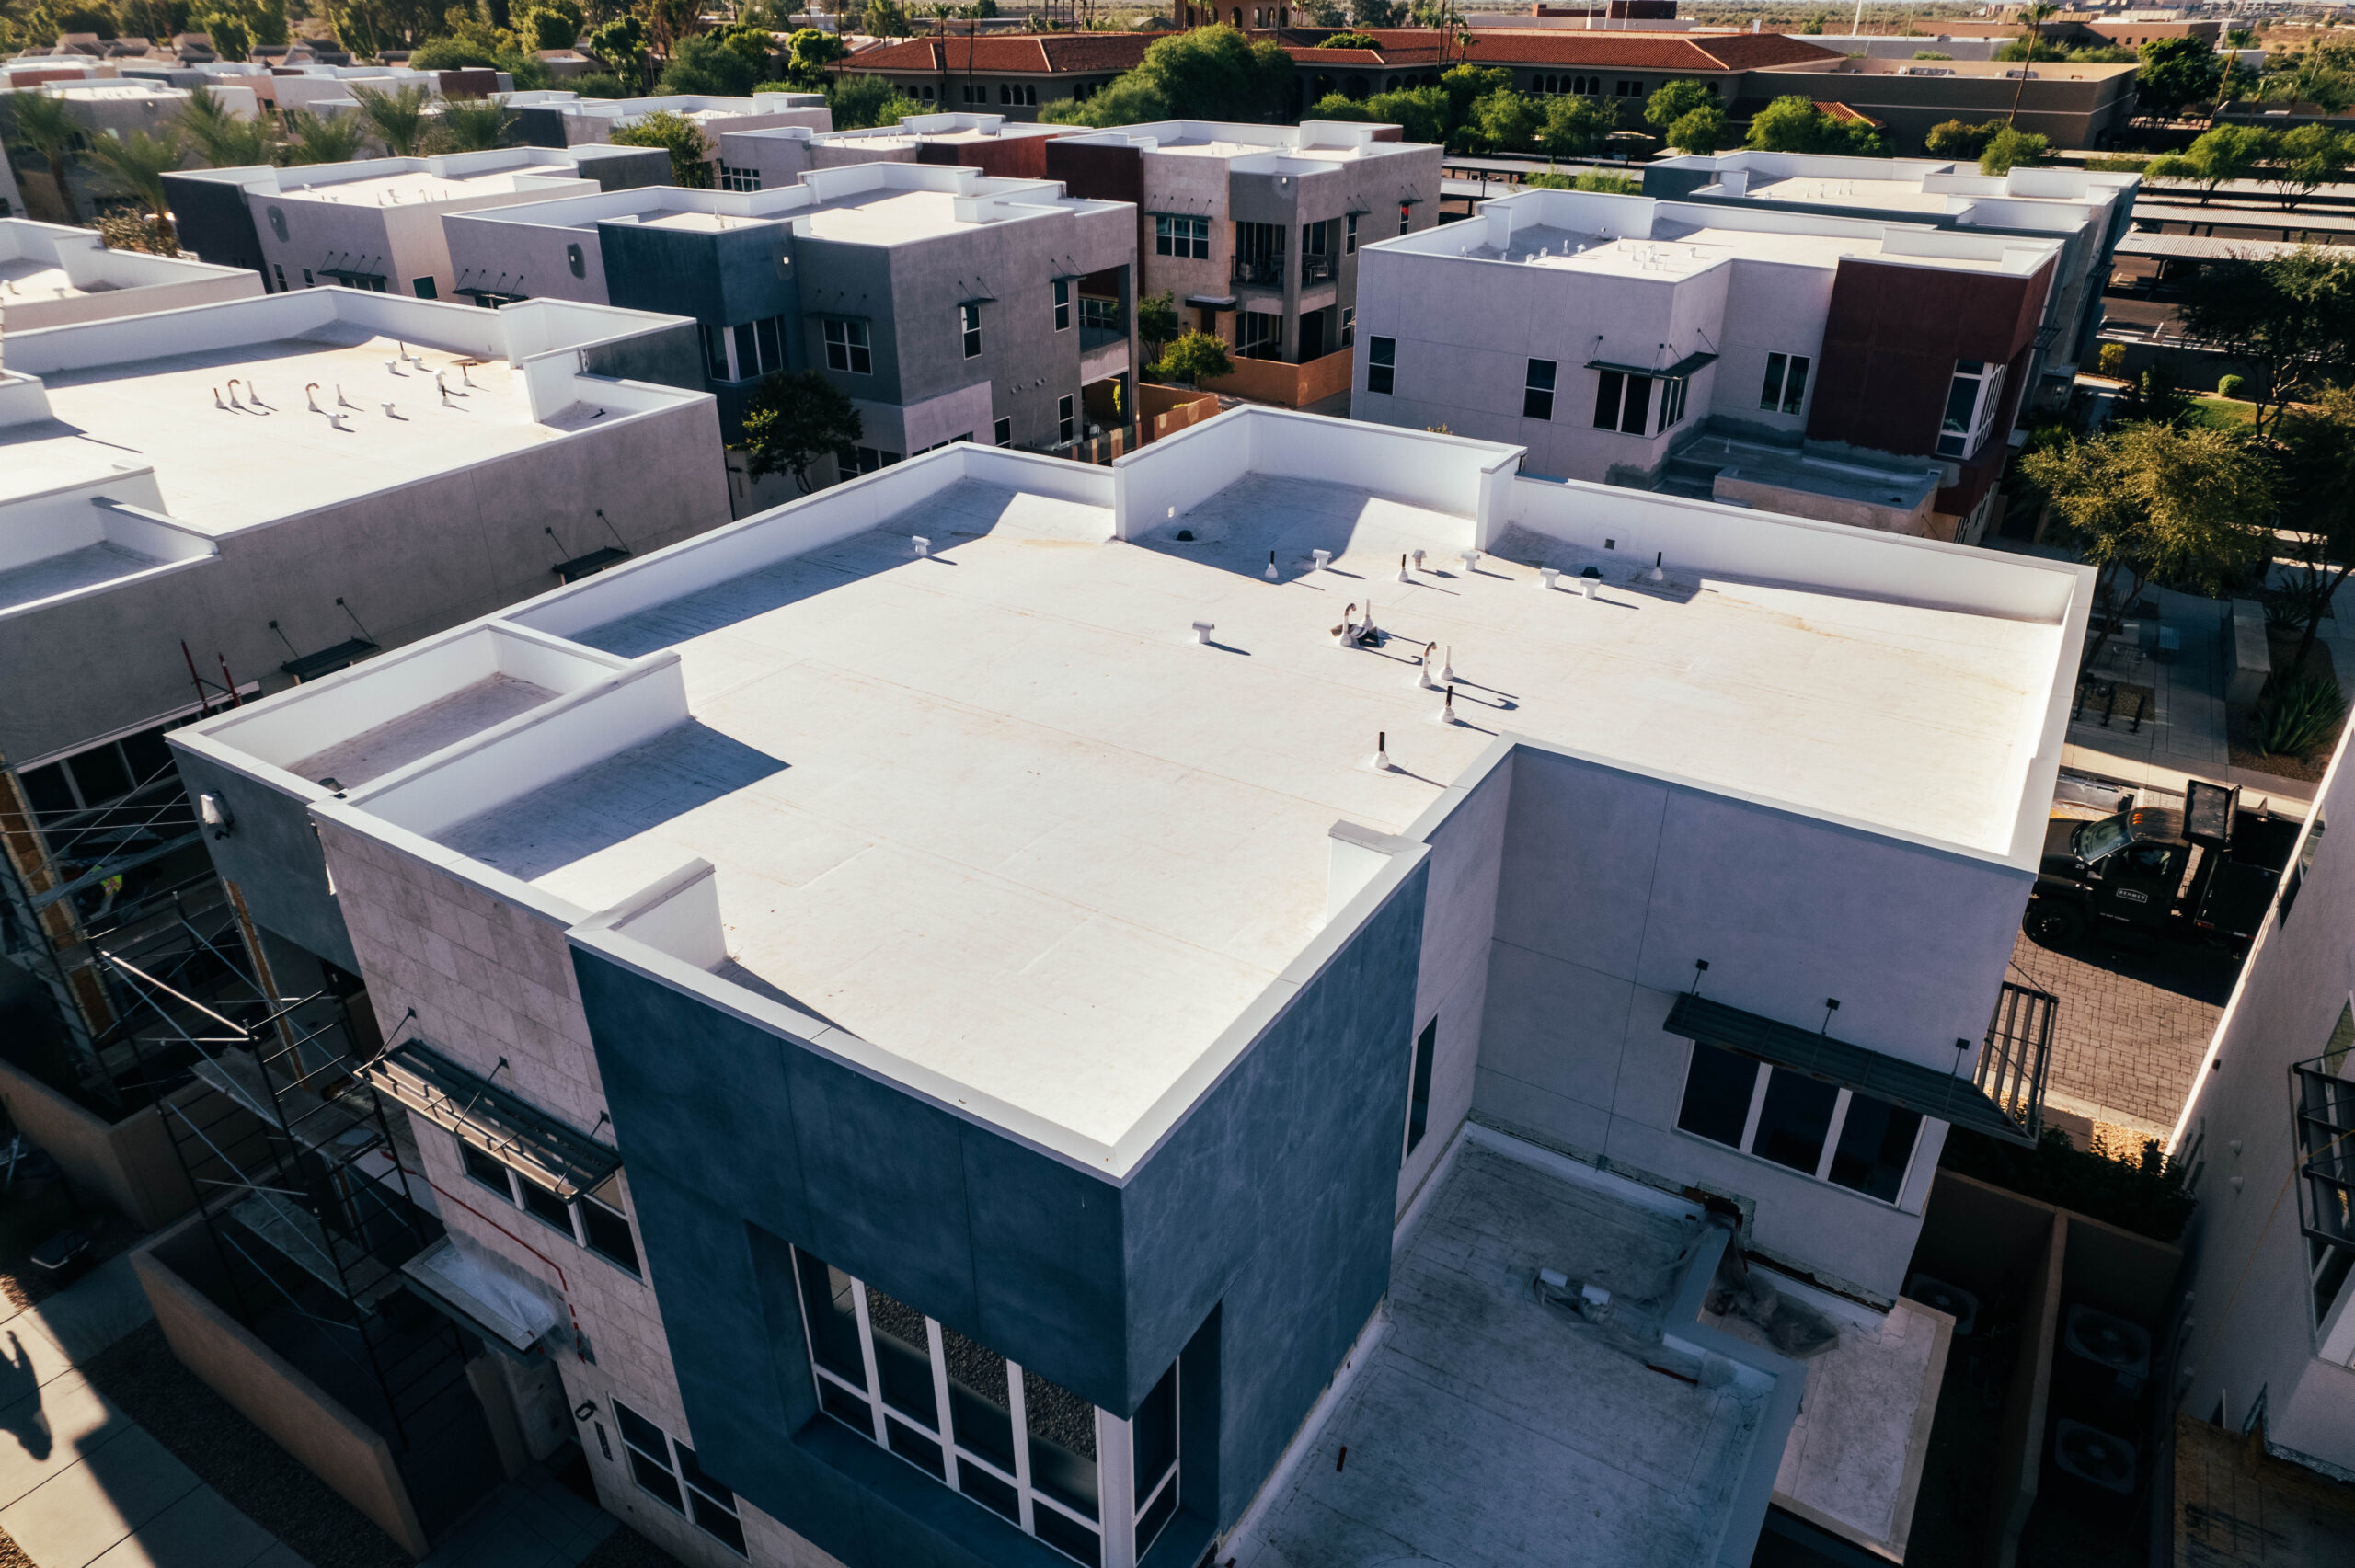 An aerial view of a group of houses featuring spray foam insulation and coating installation in Phoenix.